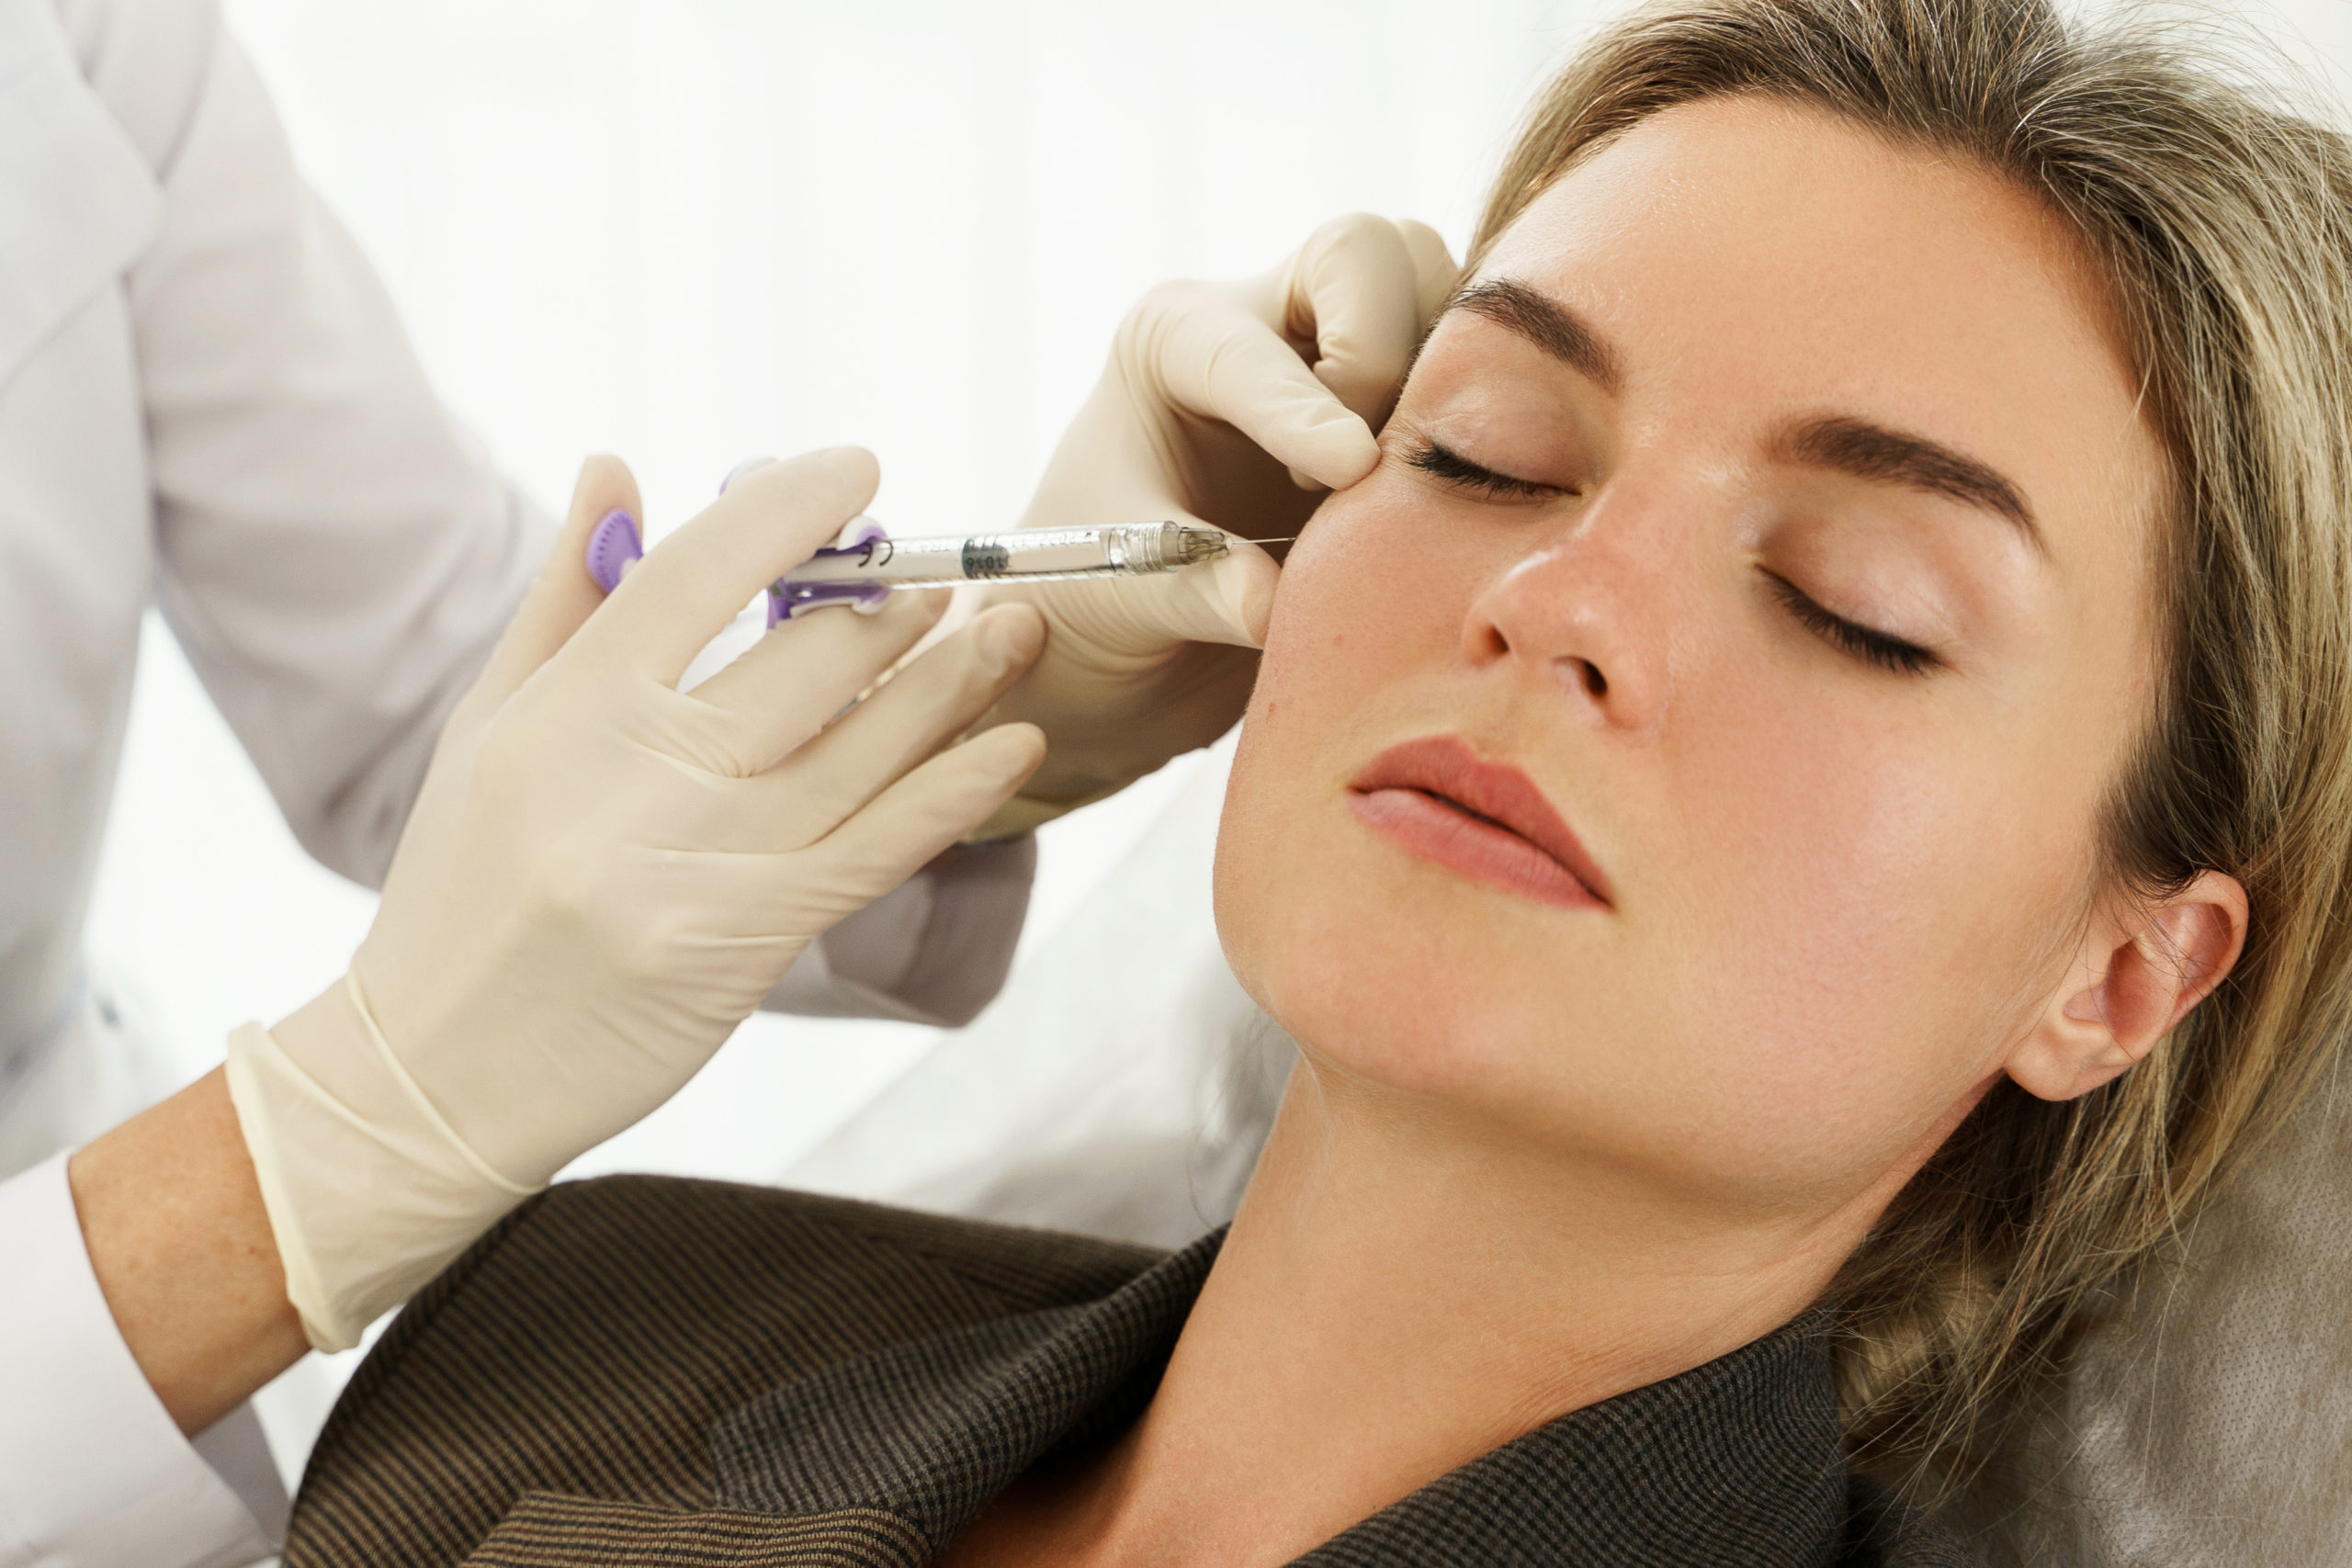 Facial Fillers A Brief Description About The Conditions Treated | The Sandbar Beauty Company